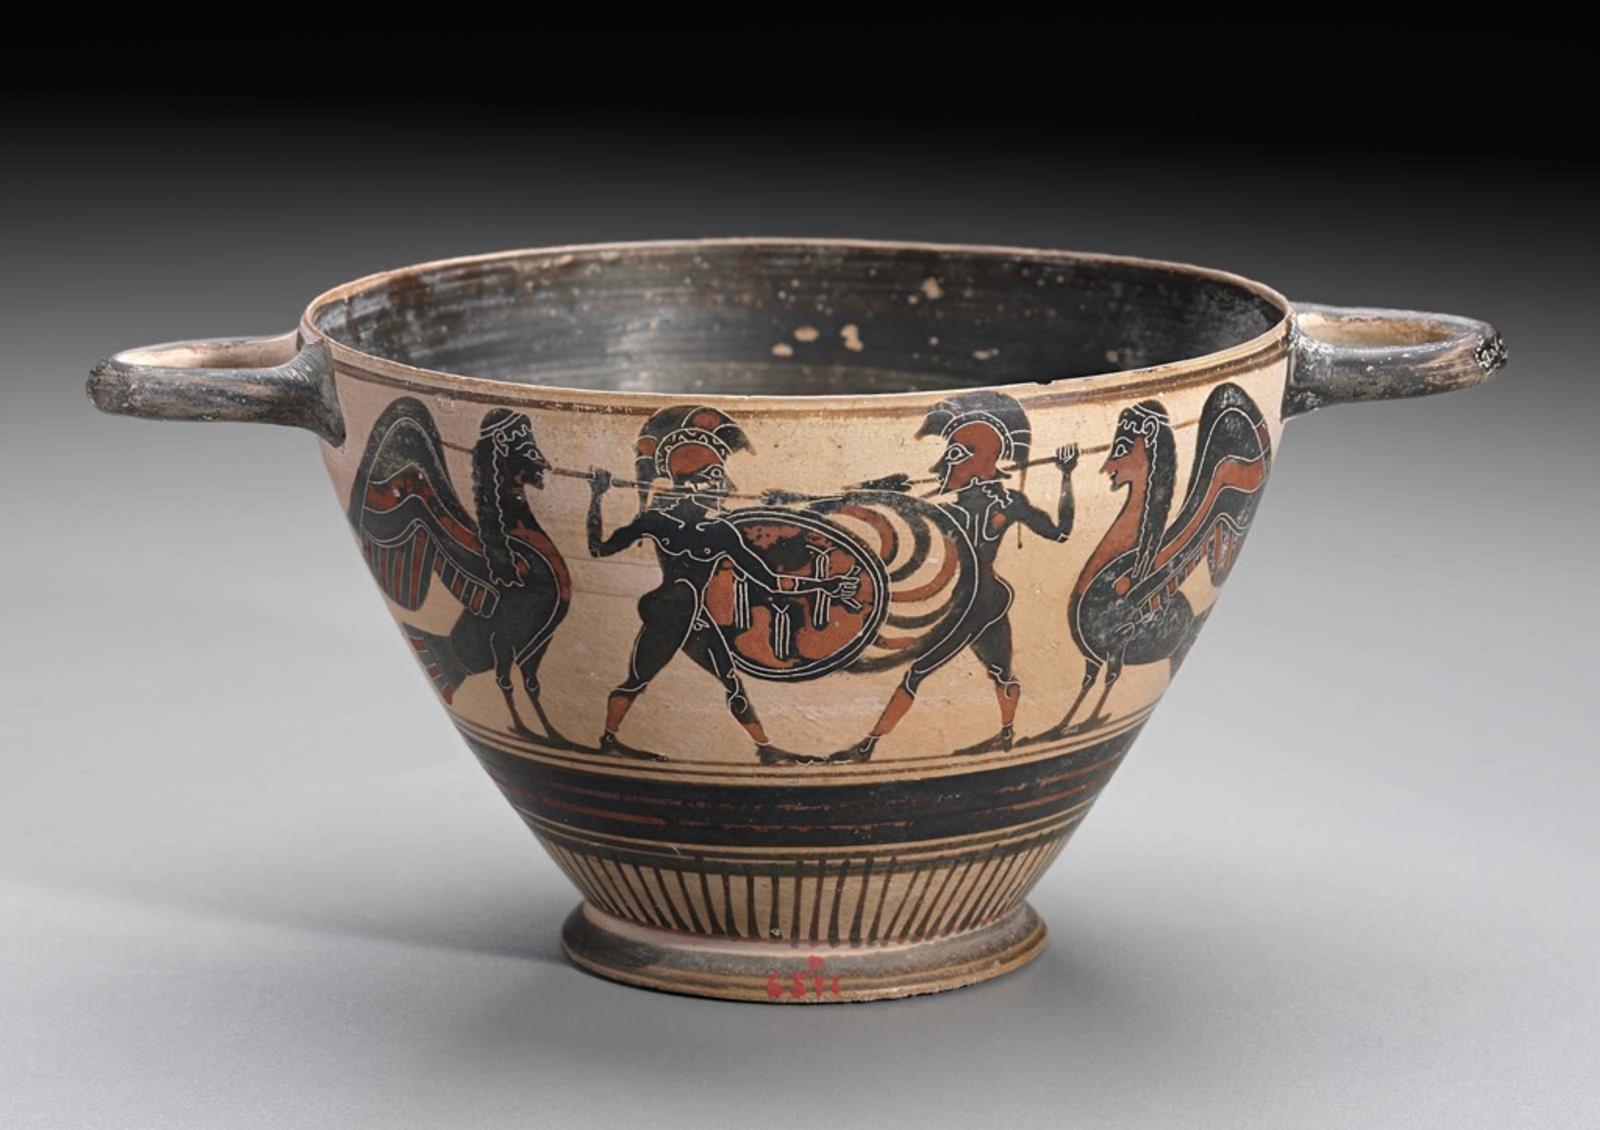 Drinking cup (skyphos) with warriors dueling